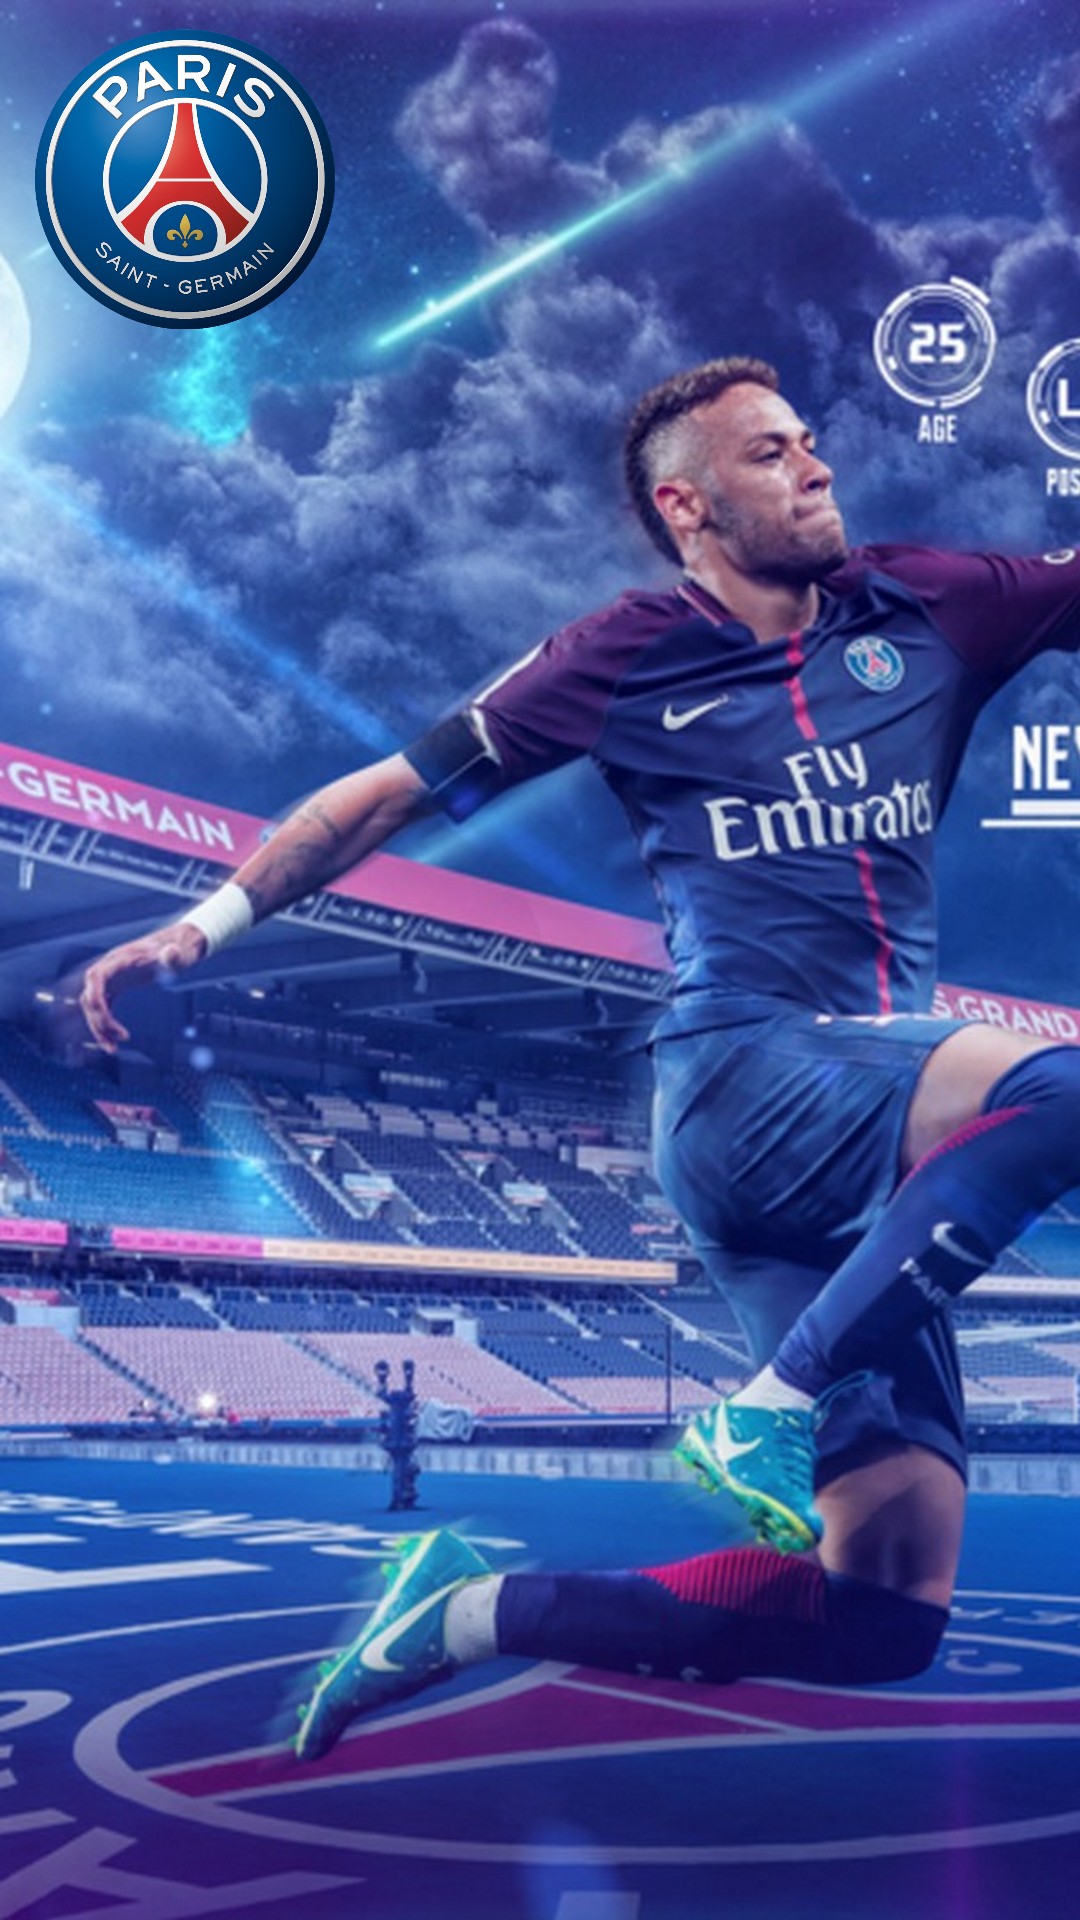 Wallpaper Neymar Psg Iphone With Resolution Pixel - Neymar Psg Neymar Wallpaper Iphone 2018 , HD Wallpaper & Backgrounds